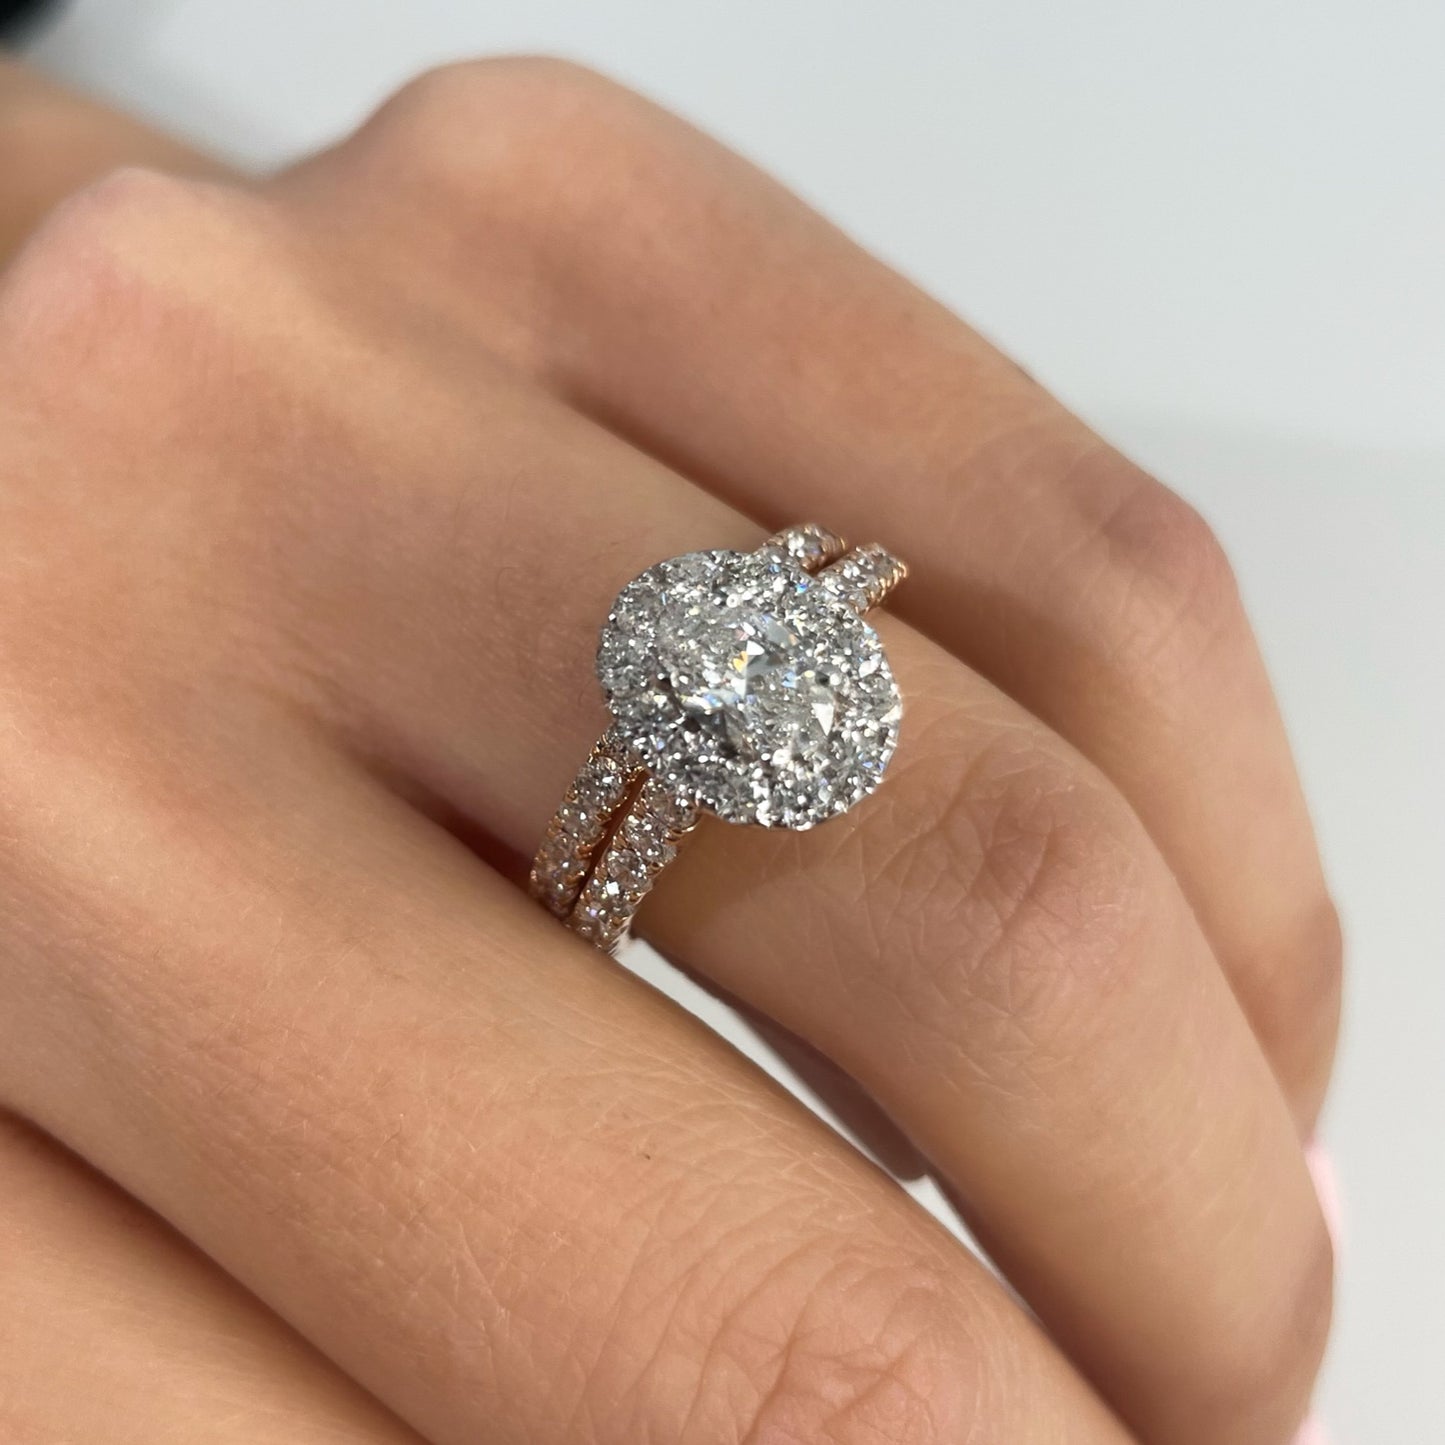 Oval Cut Halo Engagement Ring - 2.02 CT